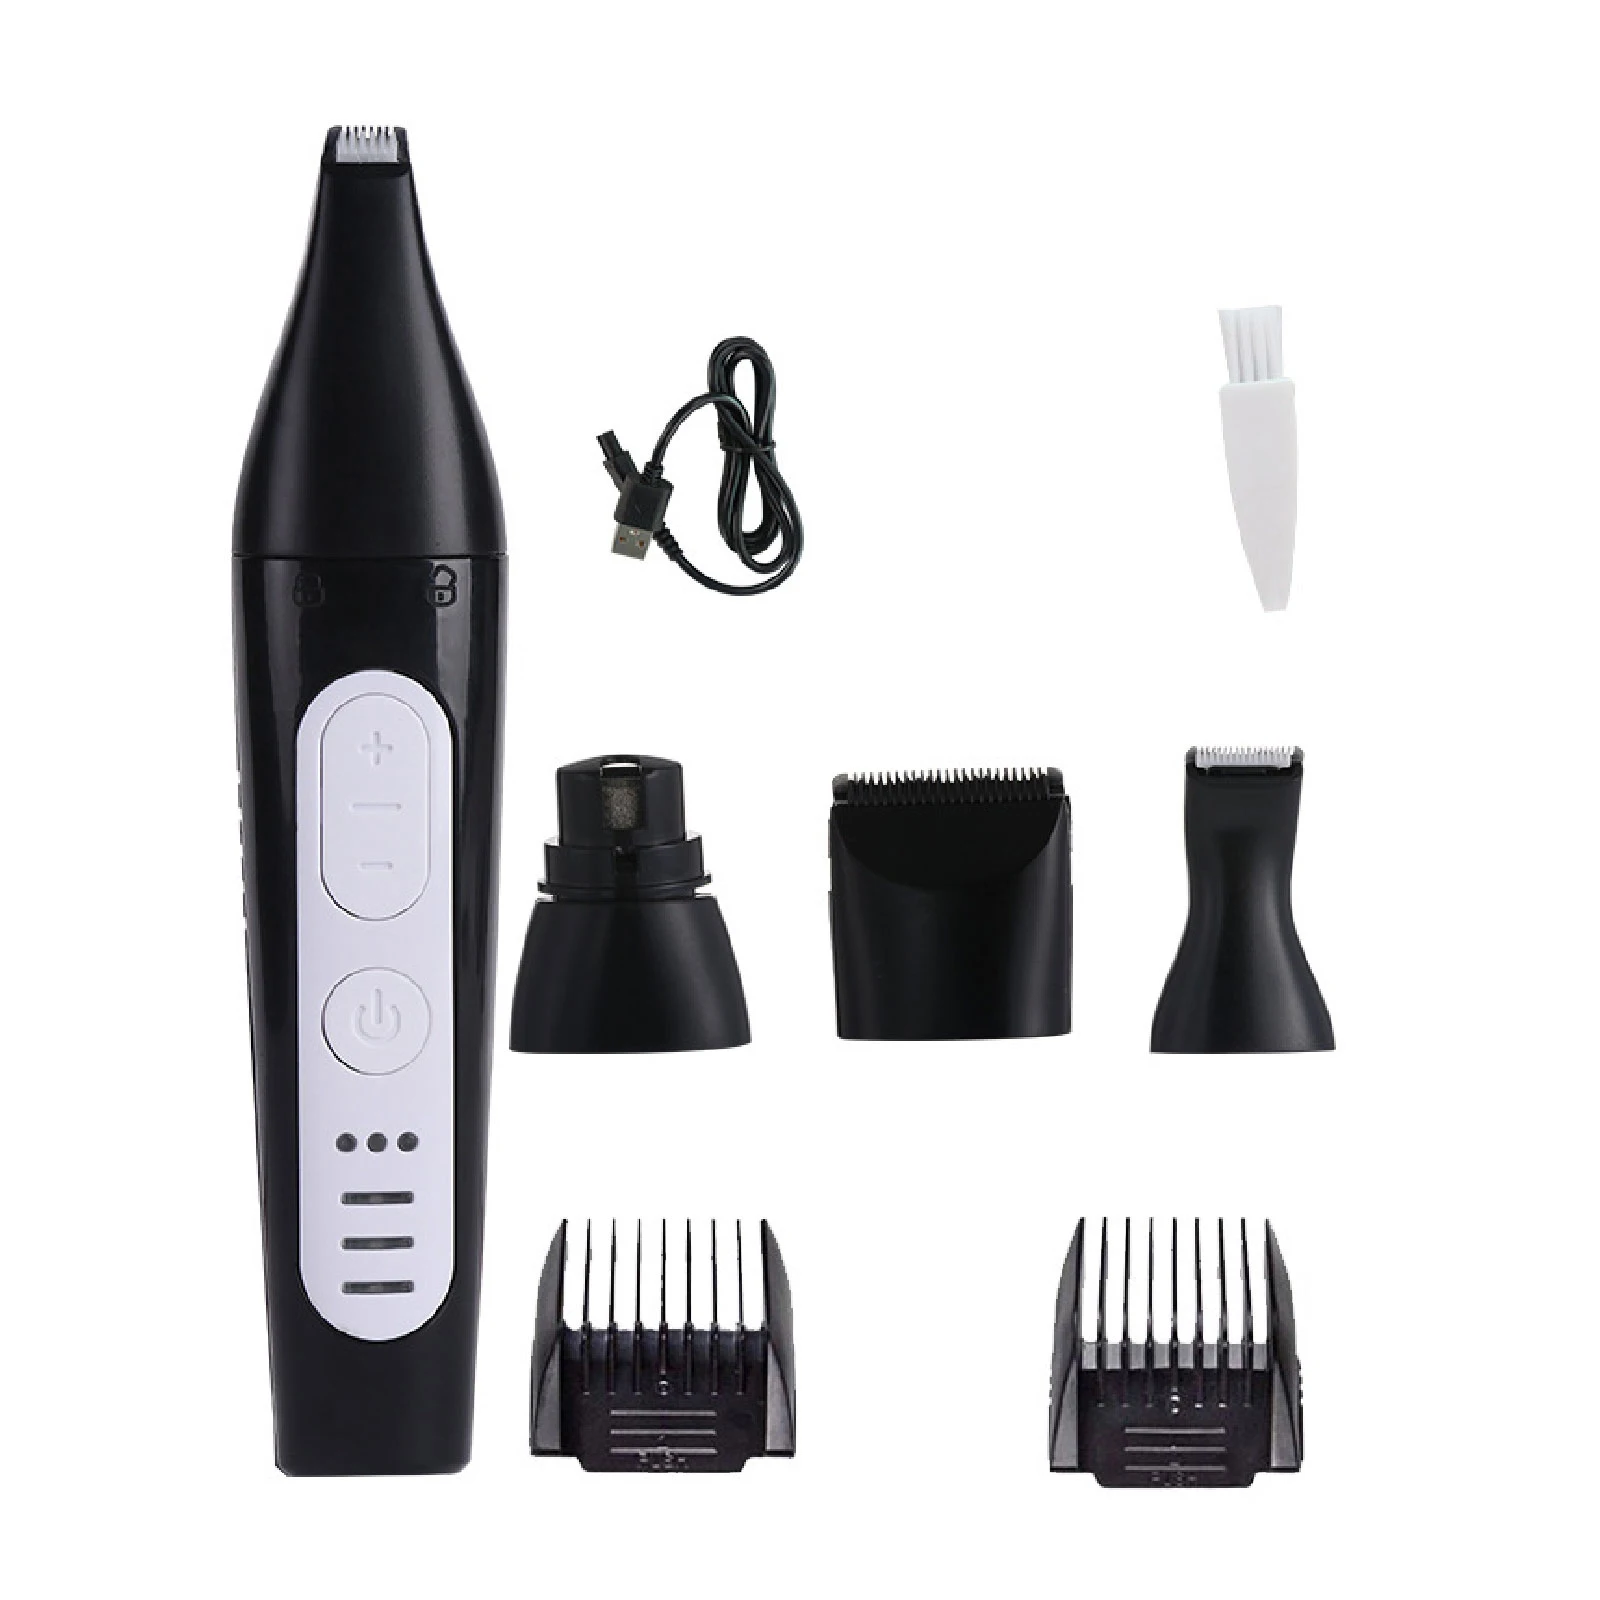 

Dog Clippers 4 In 1 Pet Trimmer Grooming Kit With Pet Nail Polisher Cordless Electric Hair Clipper Set For Dogs Cats Pets